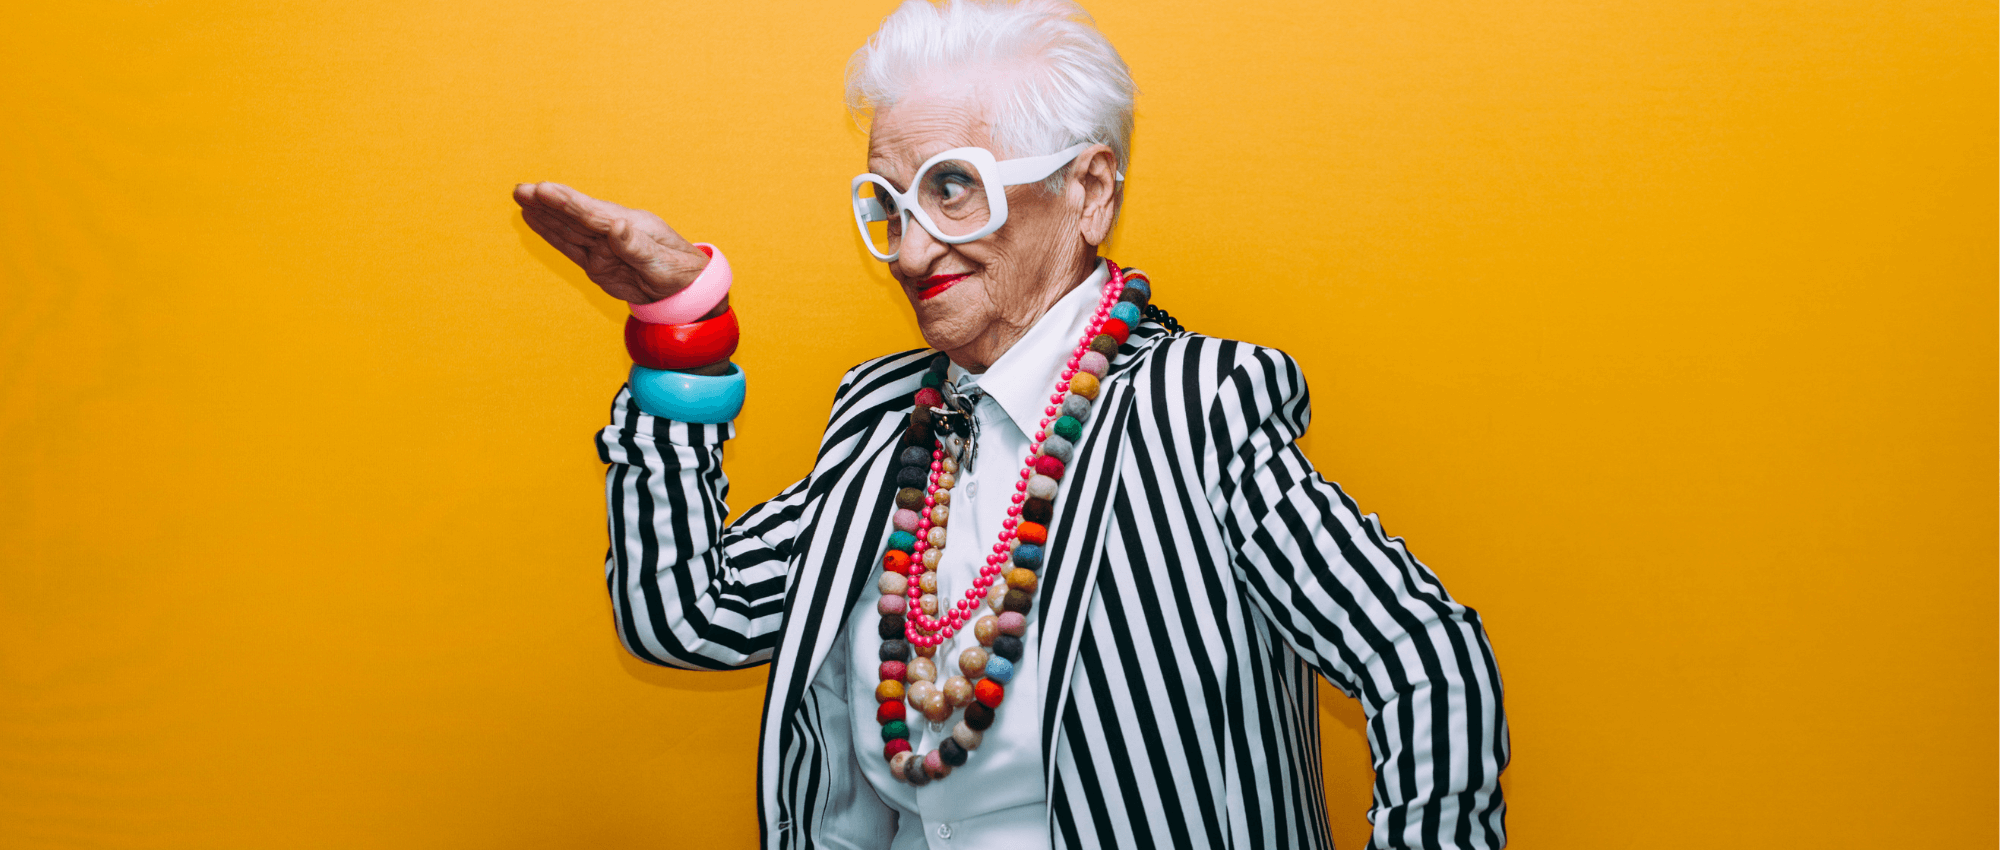 elderly woman in striped suit and jewelry